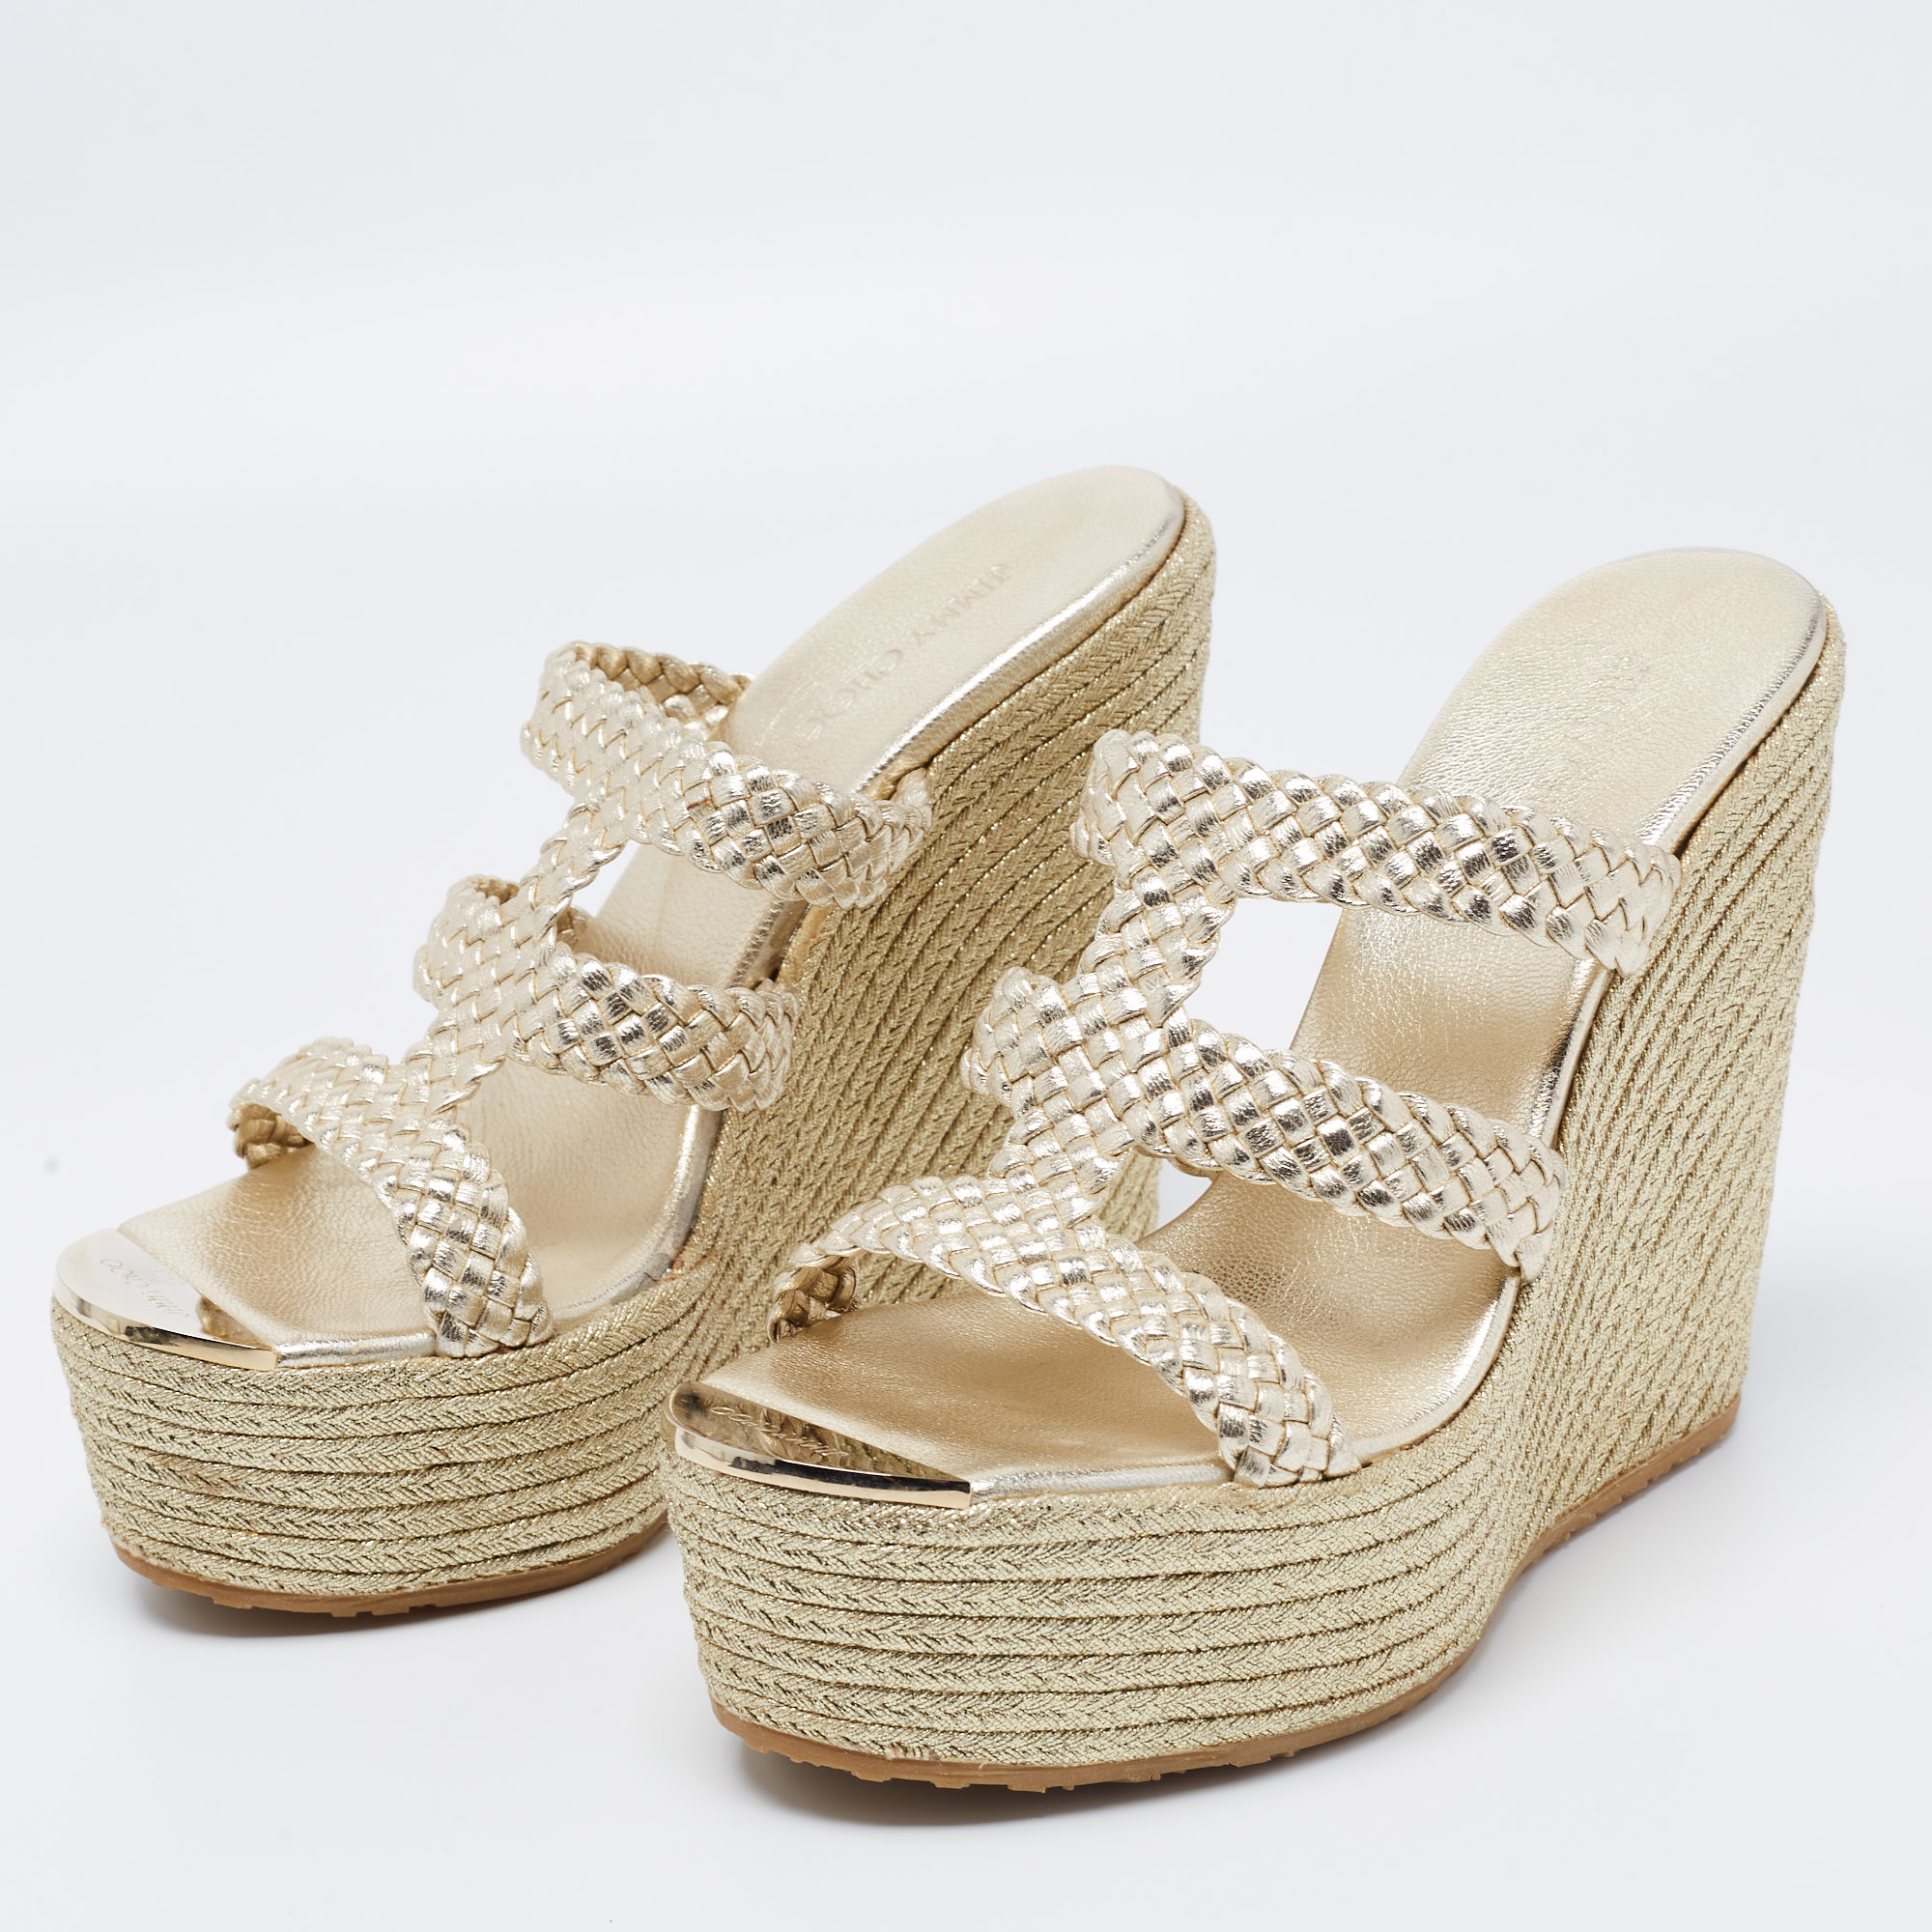 Jimmy Choo Gold Braided Leather Espadrille Wedge Sandals Sandals Size